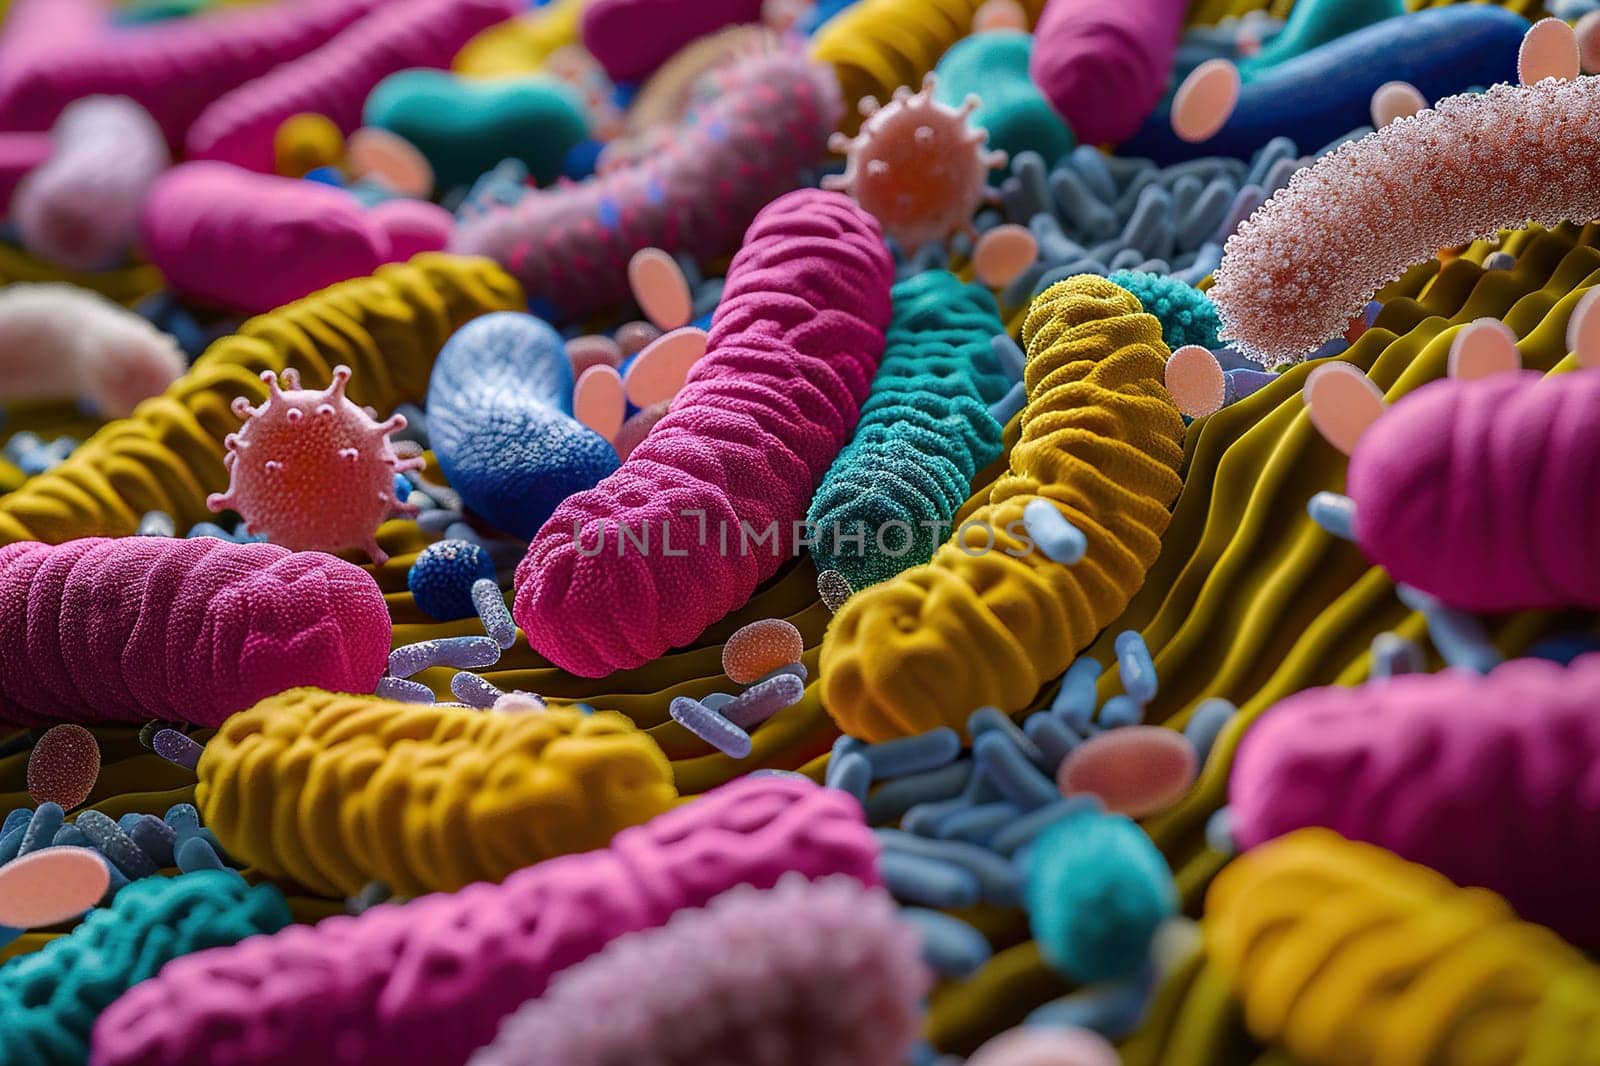 Many germs and bacteria of different shapes and colors. Microbiology. Pathogenic microbes. Generated by artificial intelligence by Vovmar